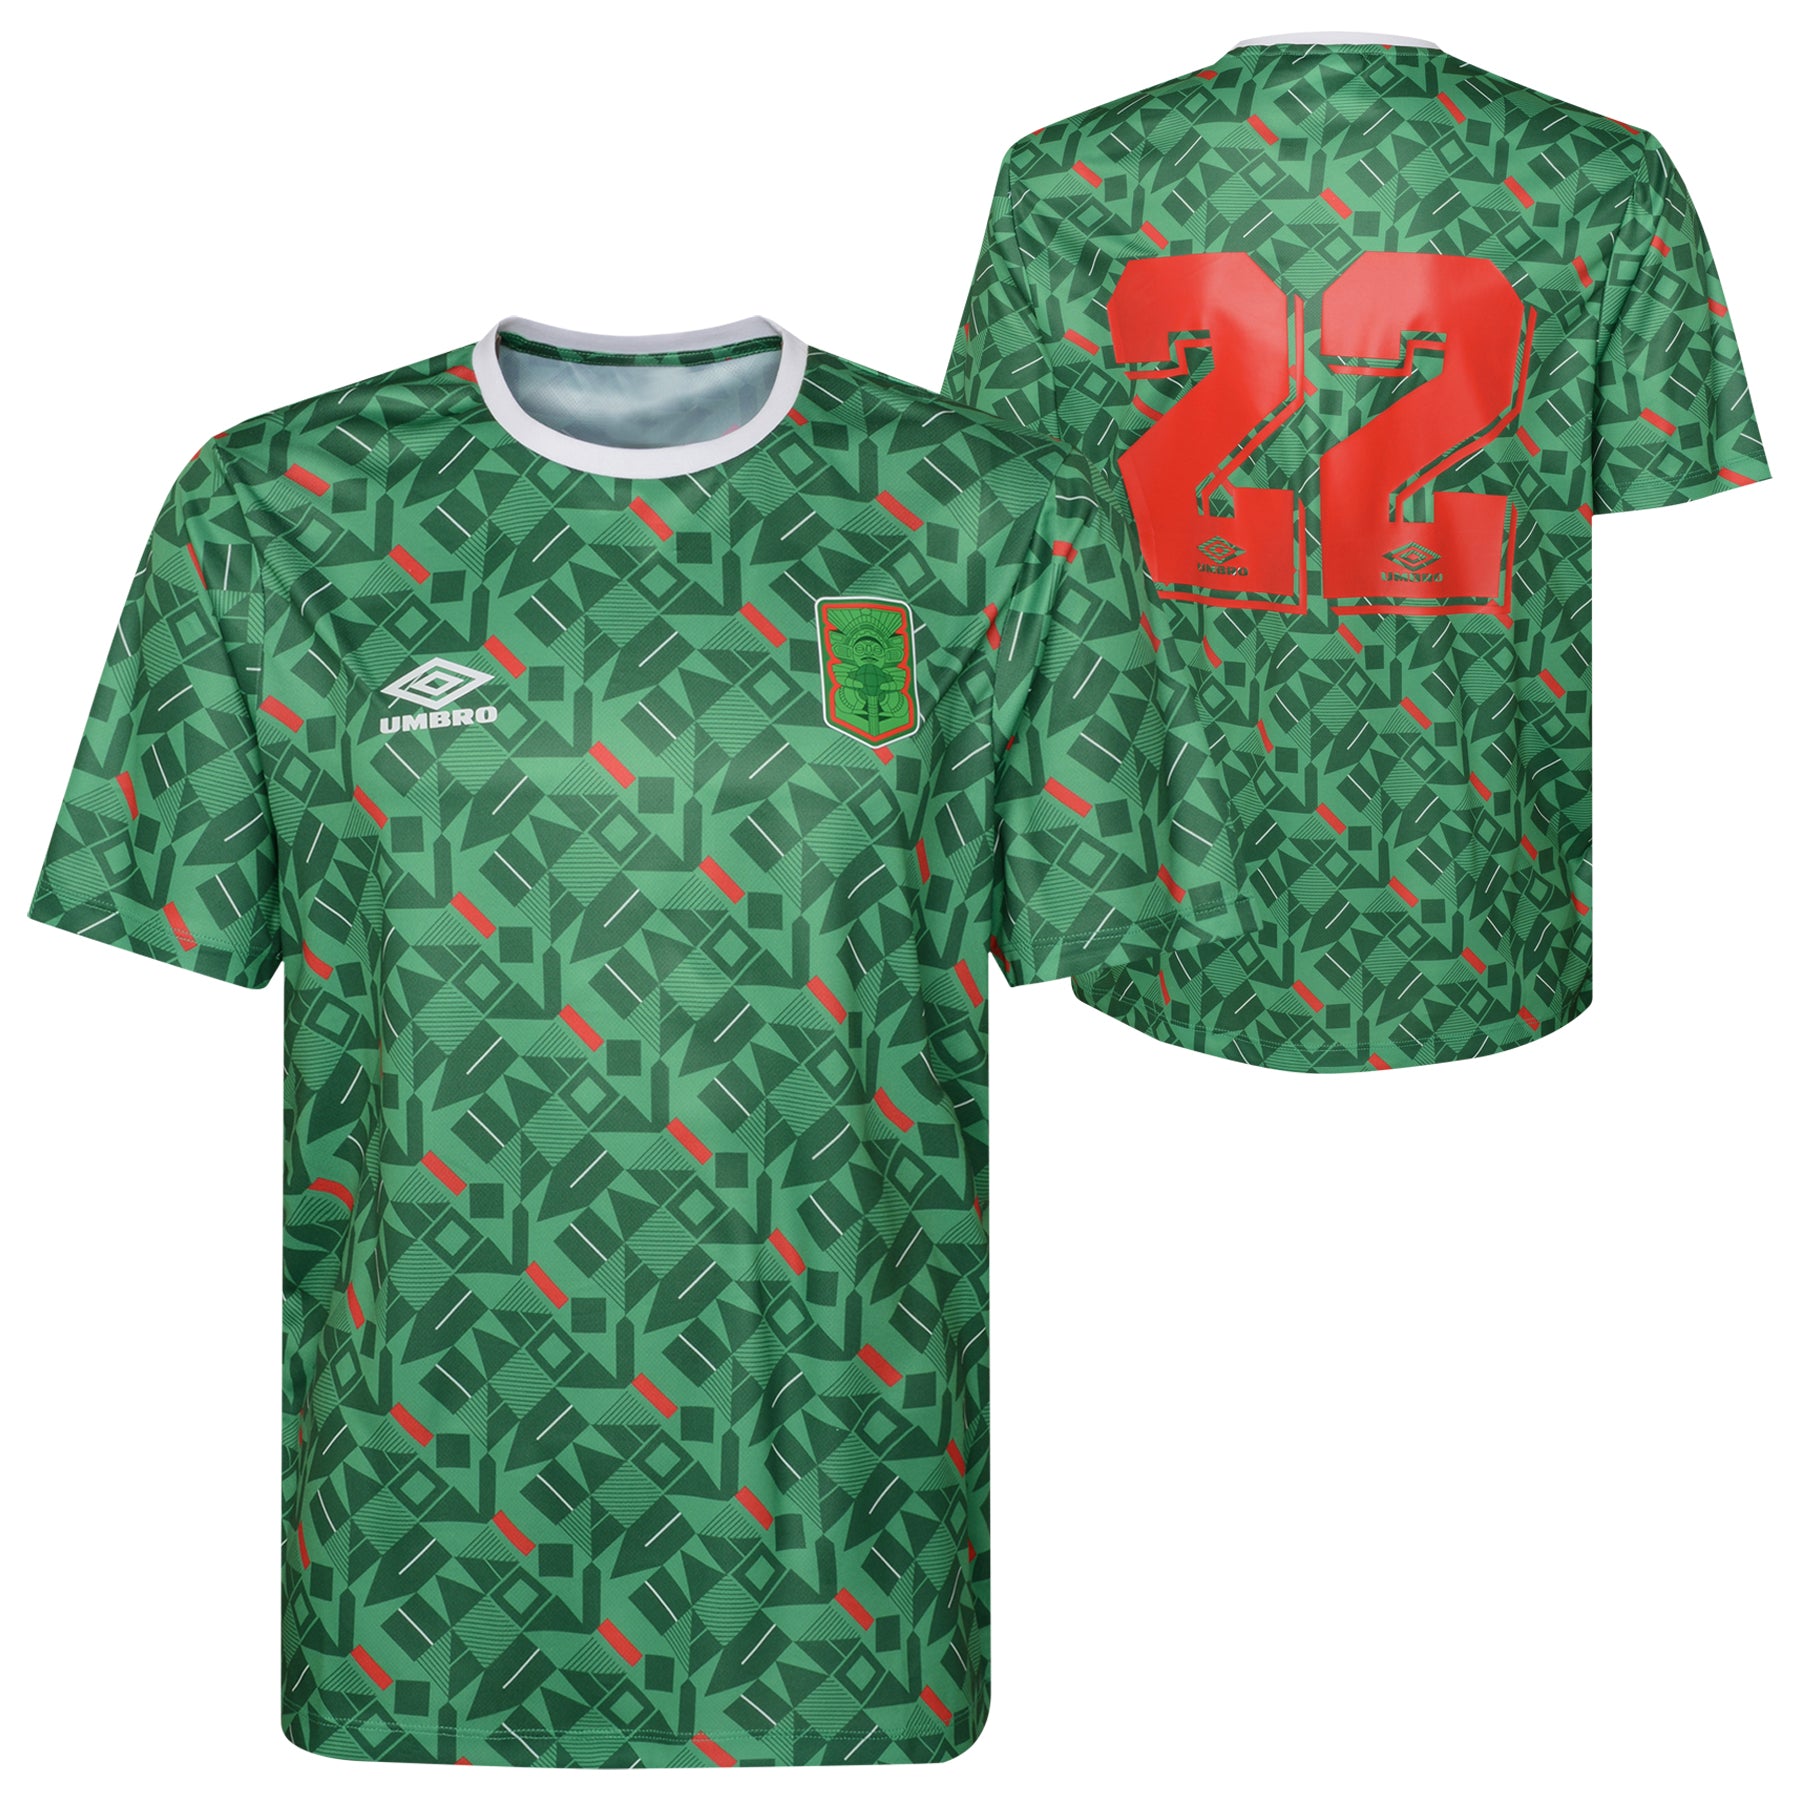 MEXICO NATIONS JERSEY